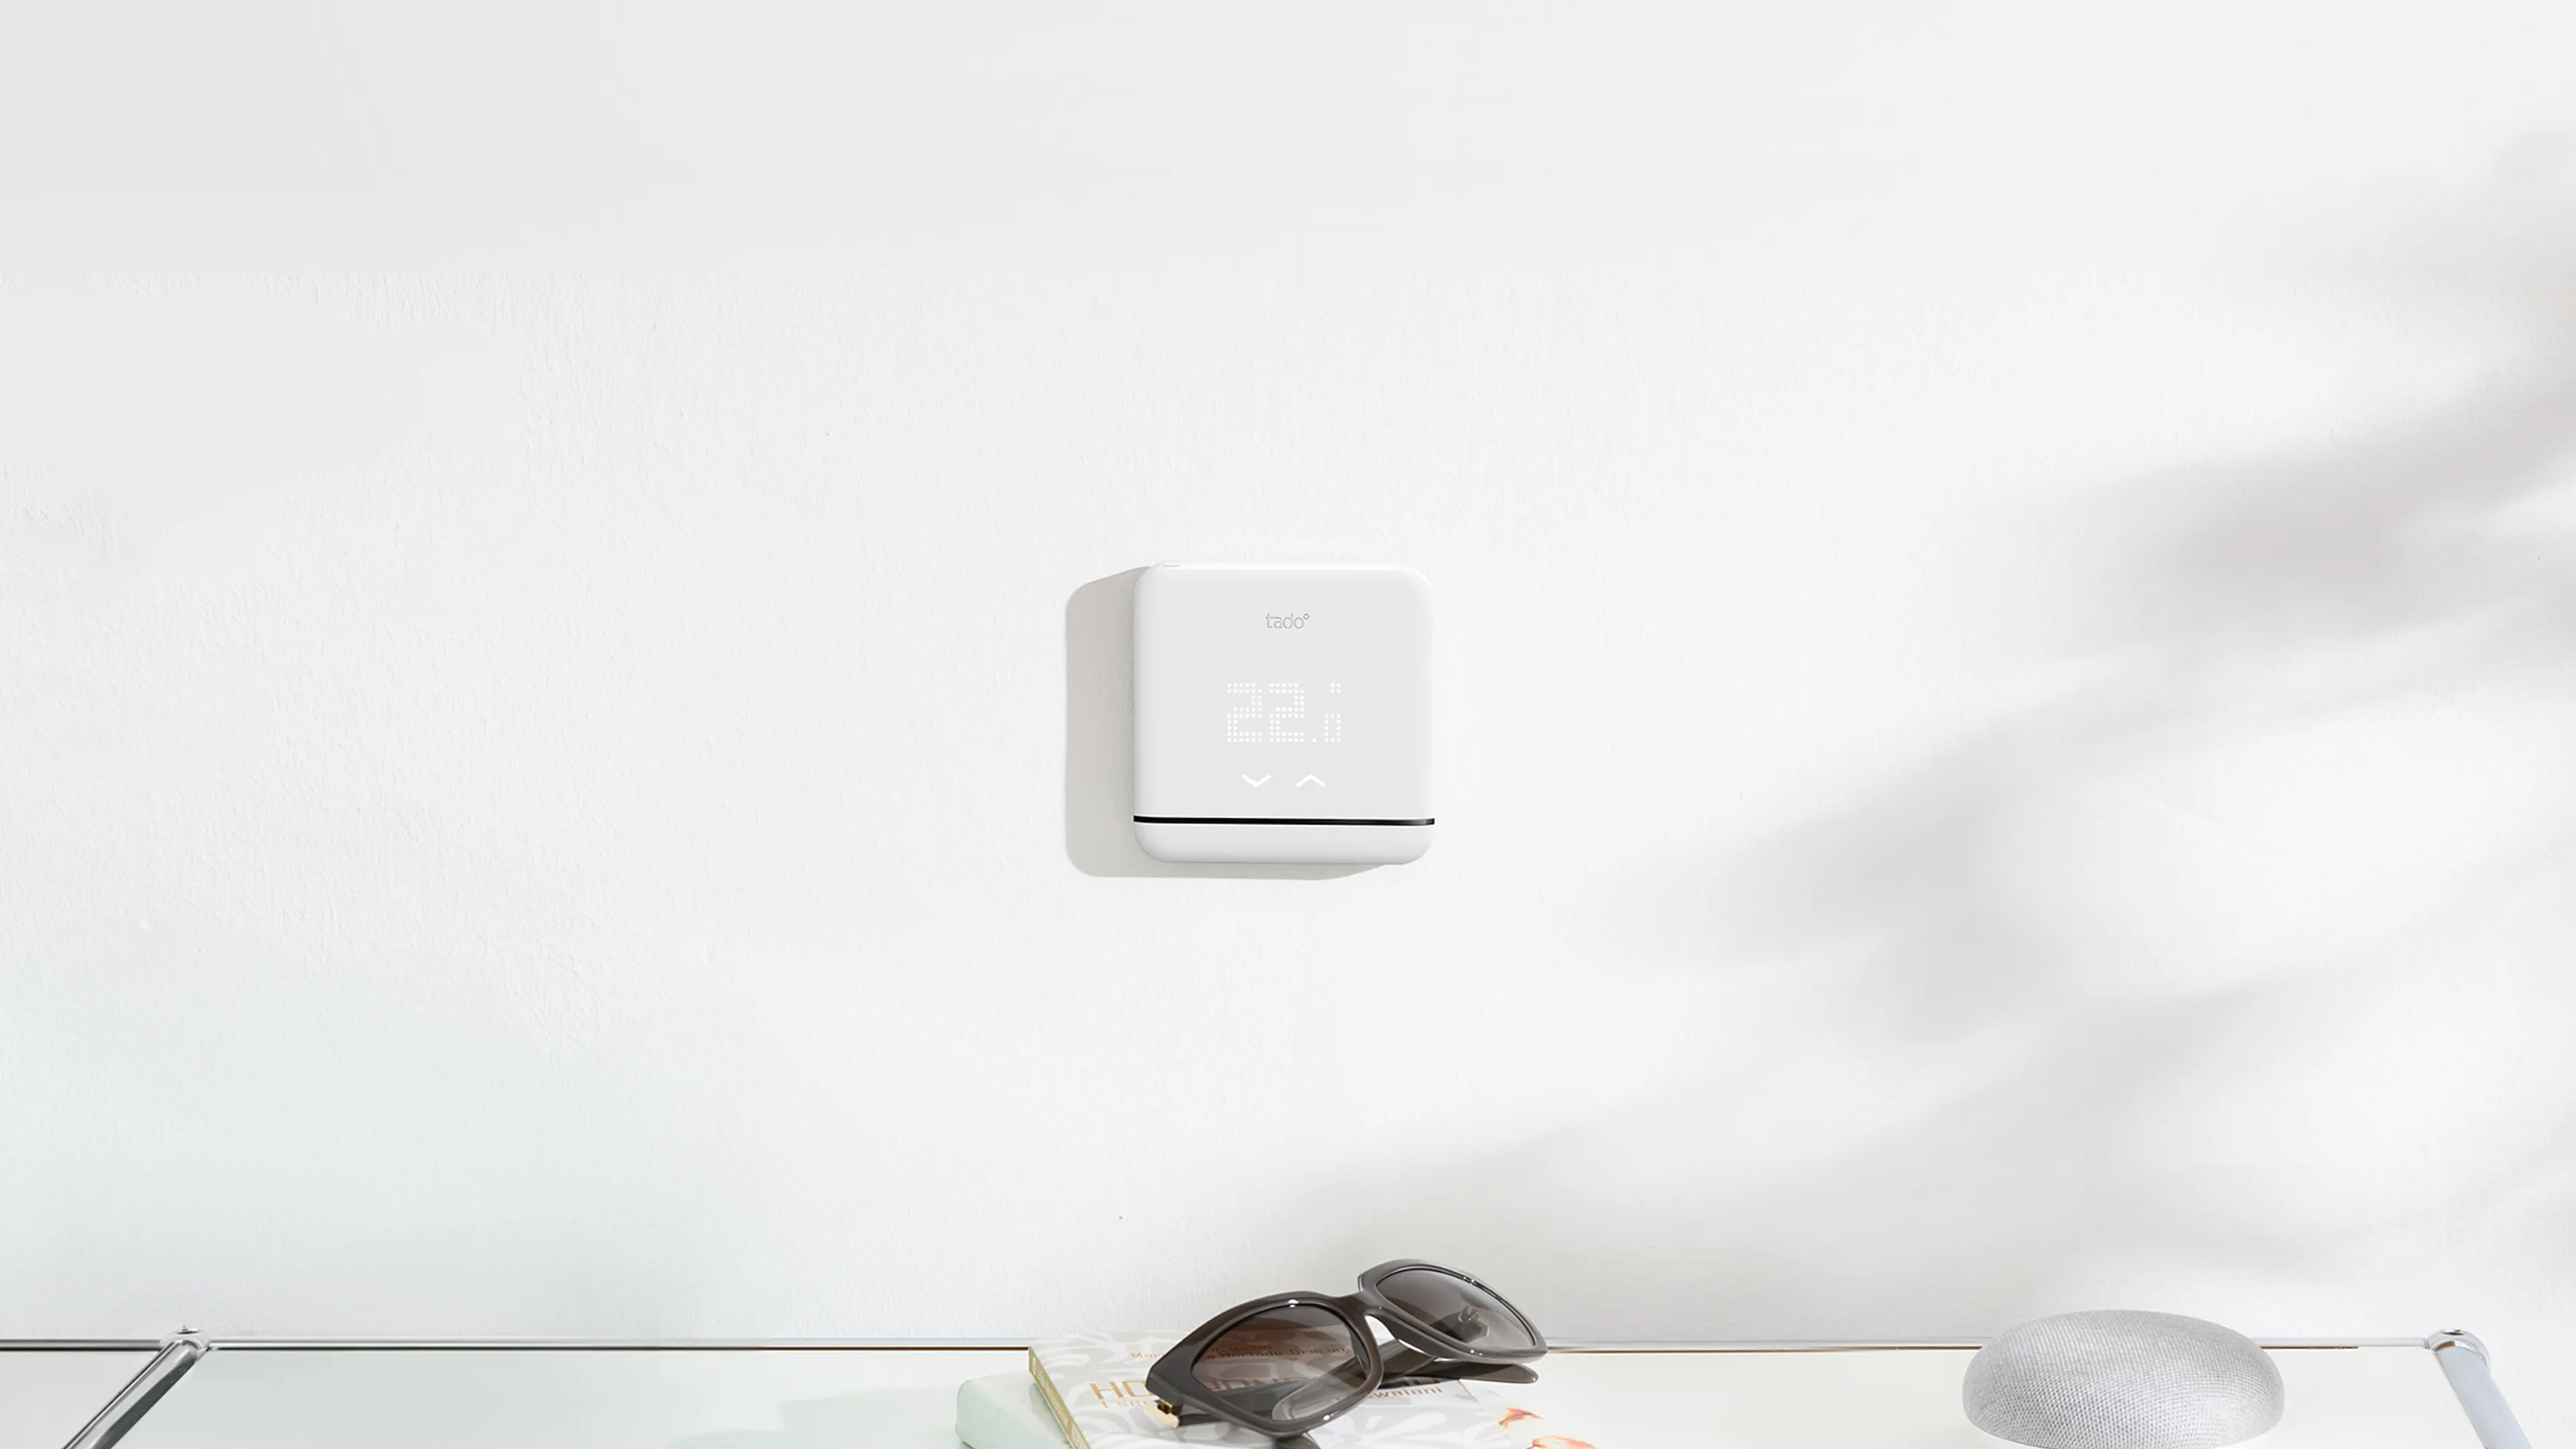 Tado smart ac control mounted on a wall over a sideboard